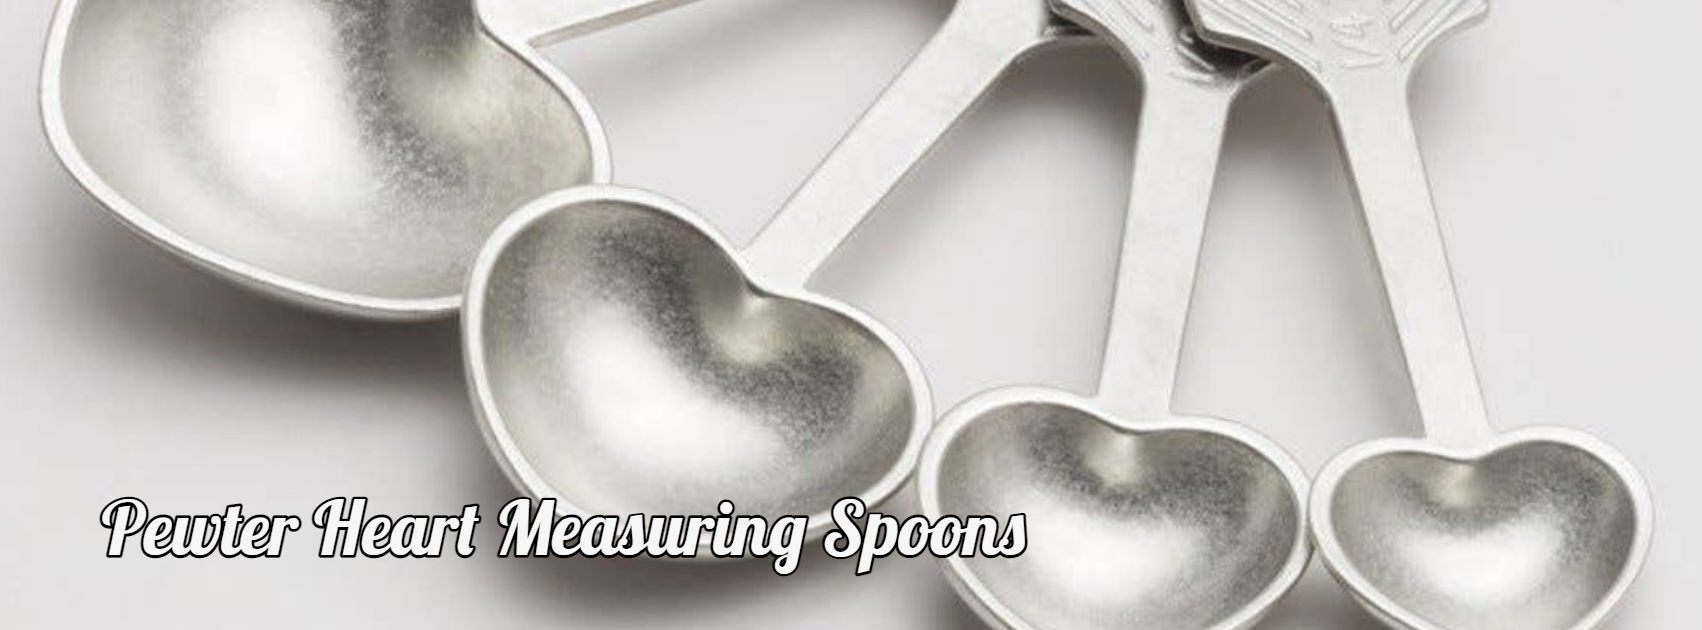 https://madefromri.com/product_images/uploaded_images/pewter-heart-measuring-spoons-cover.jpg